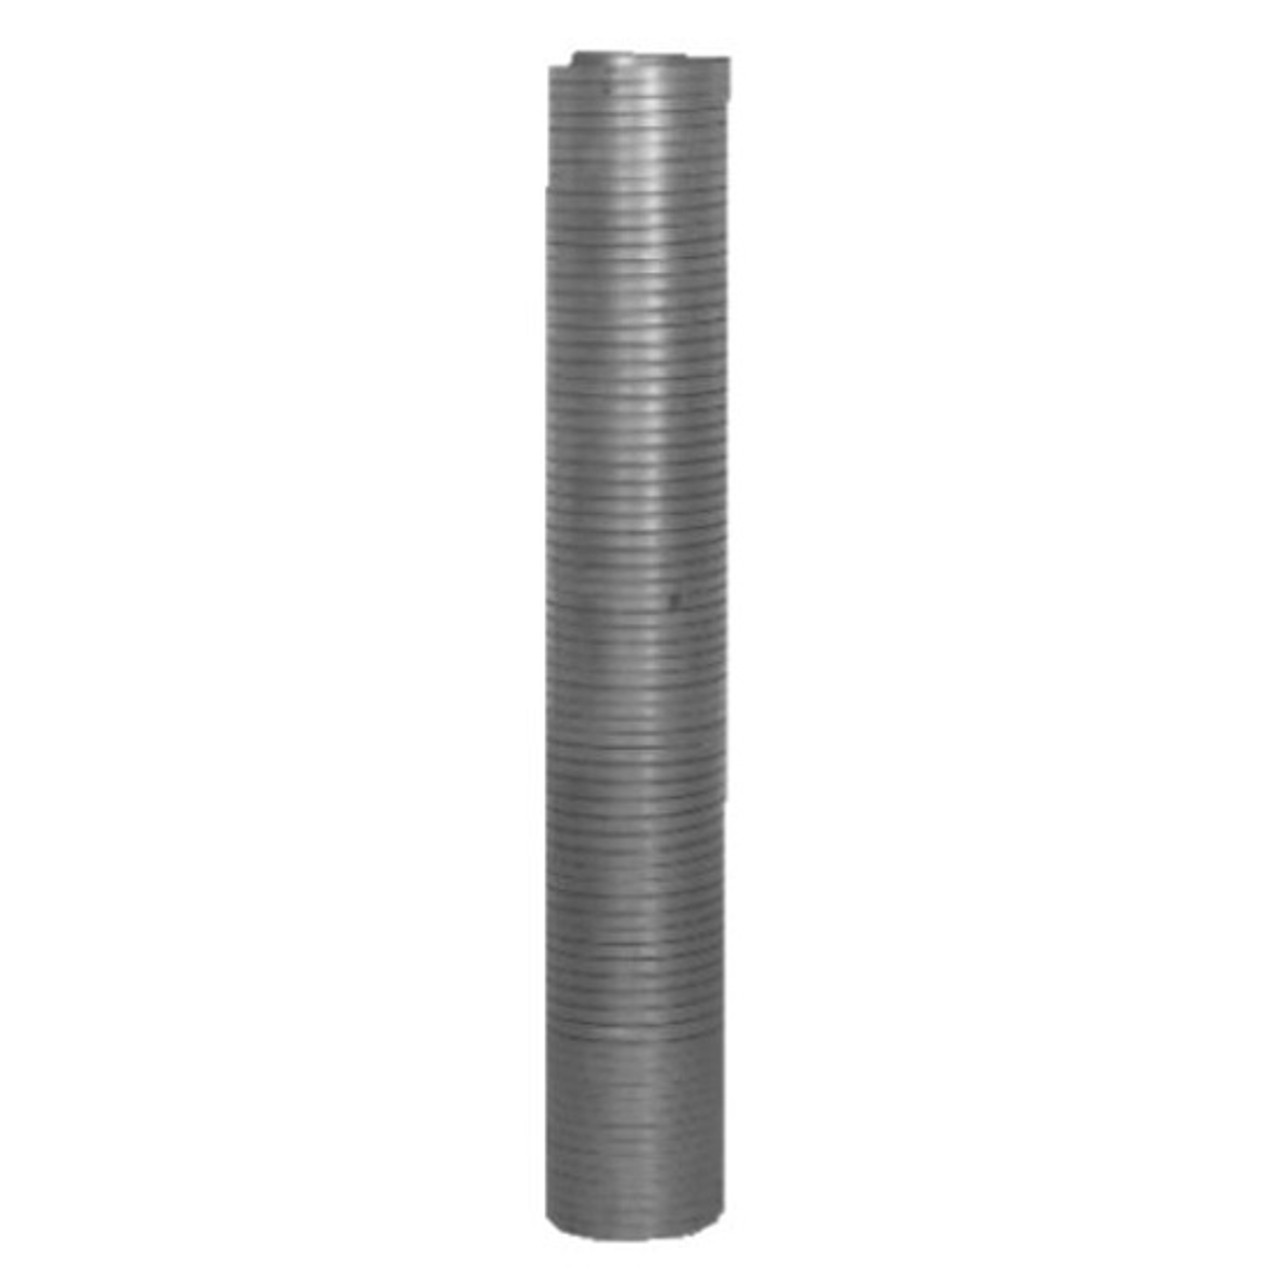 TPHD 4 Inch ID Stainless Steel Flex Pipe